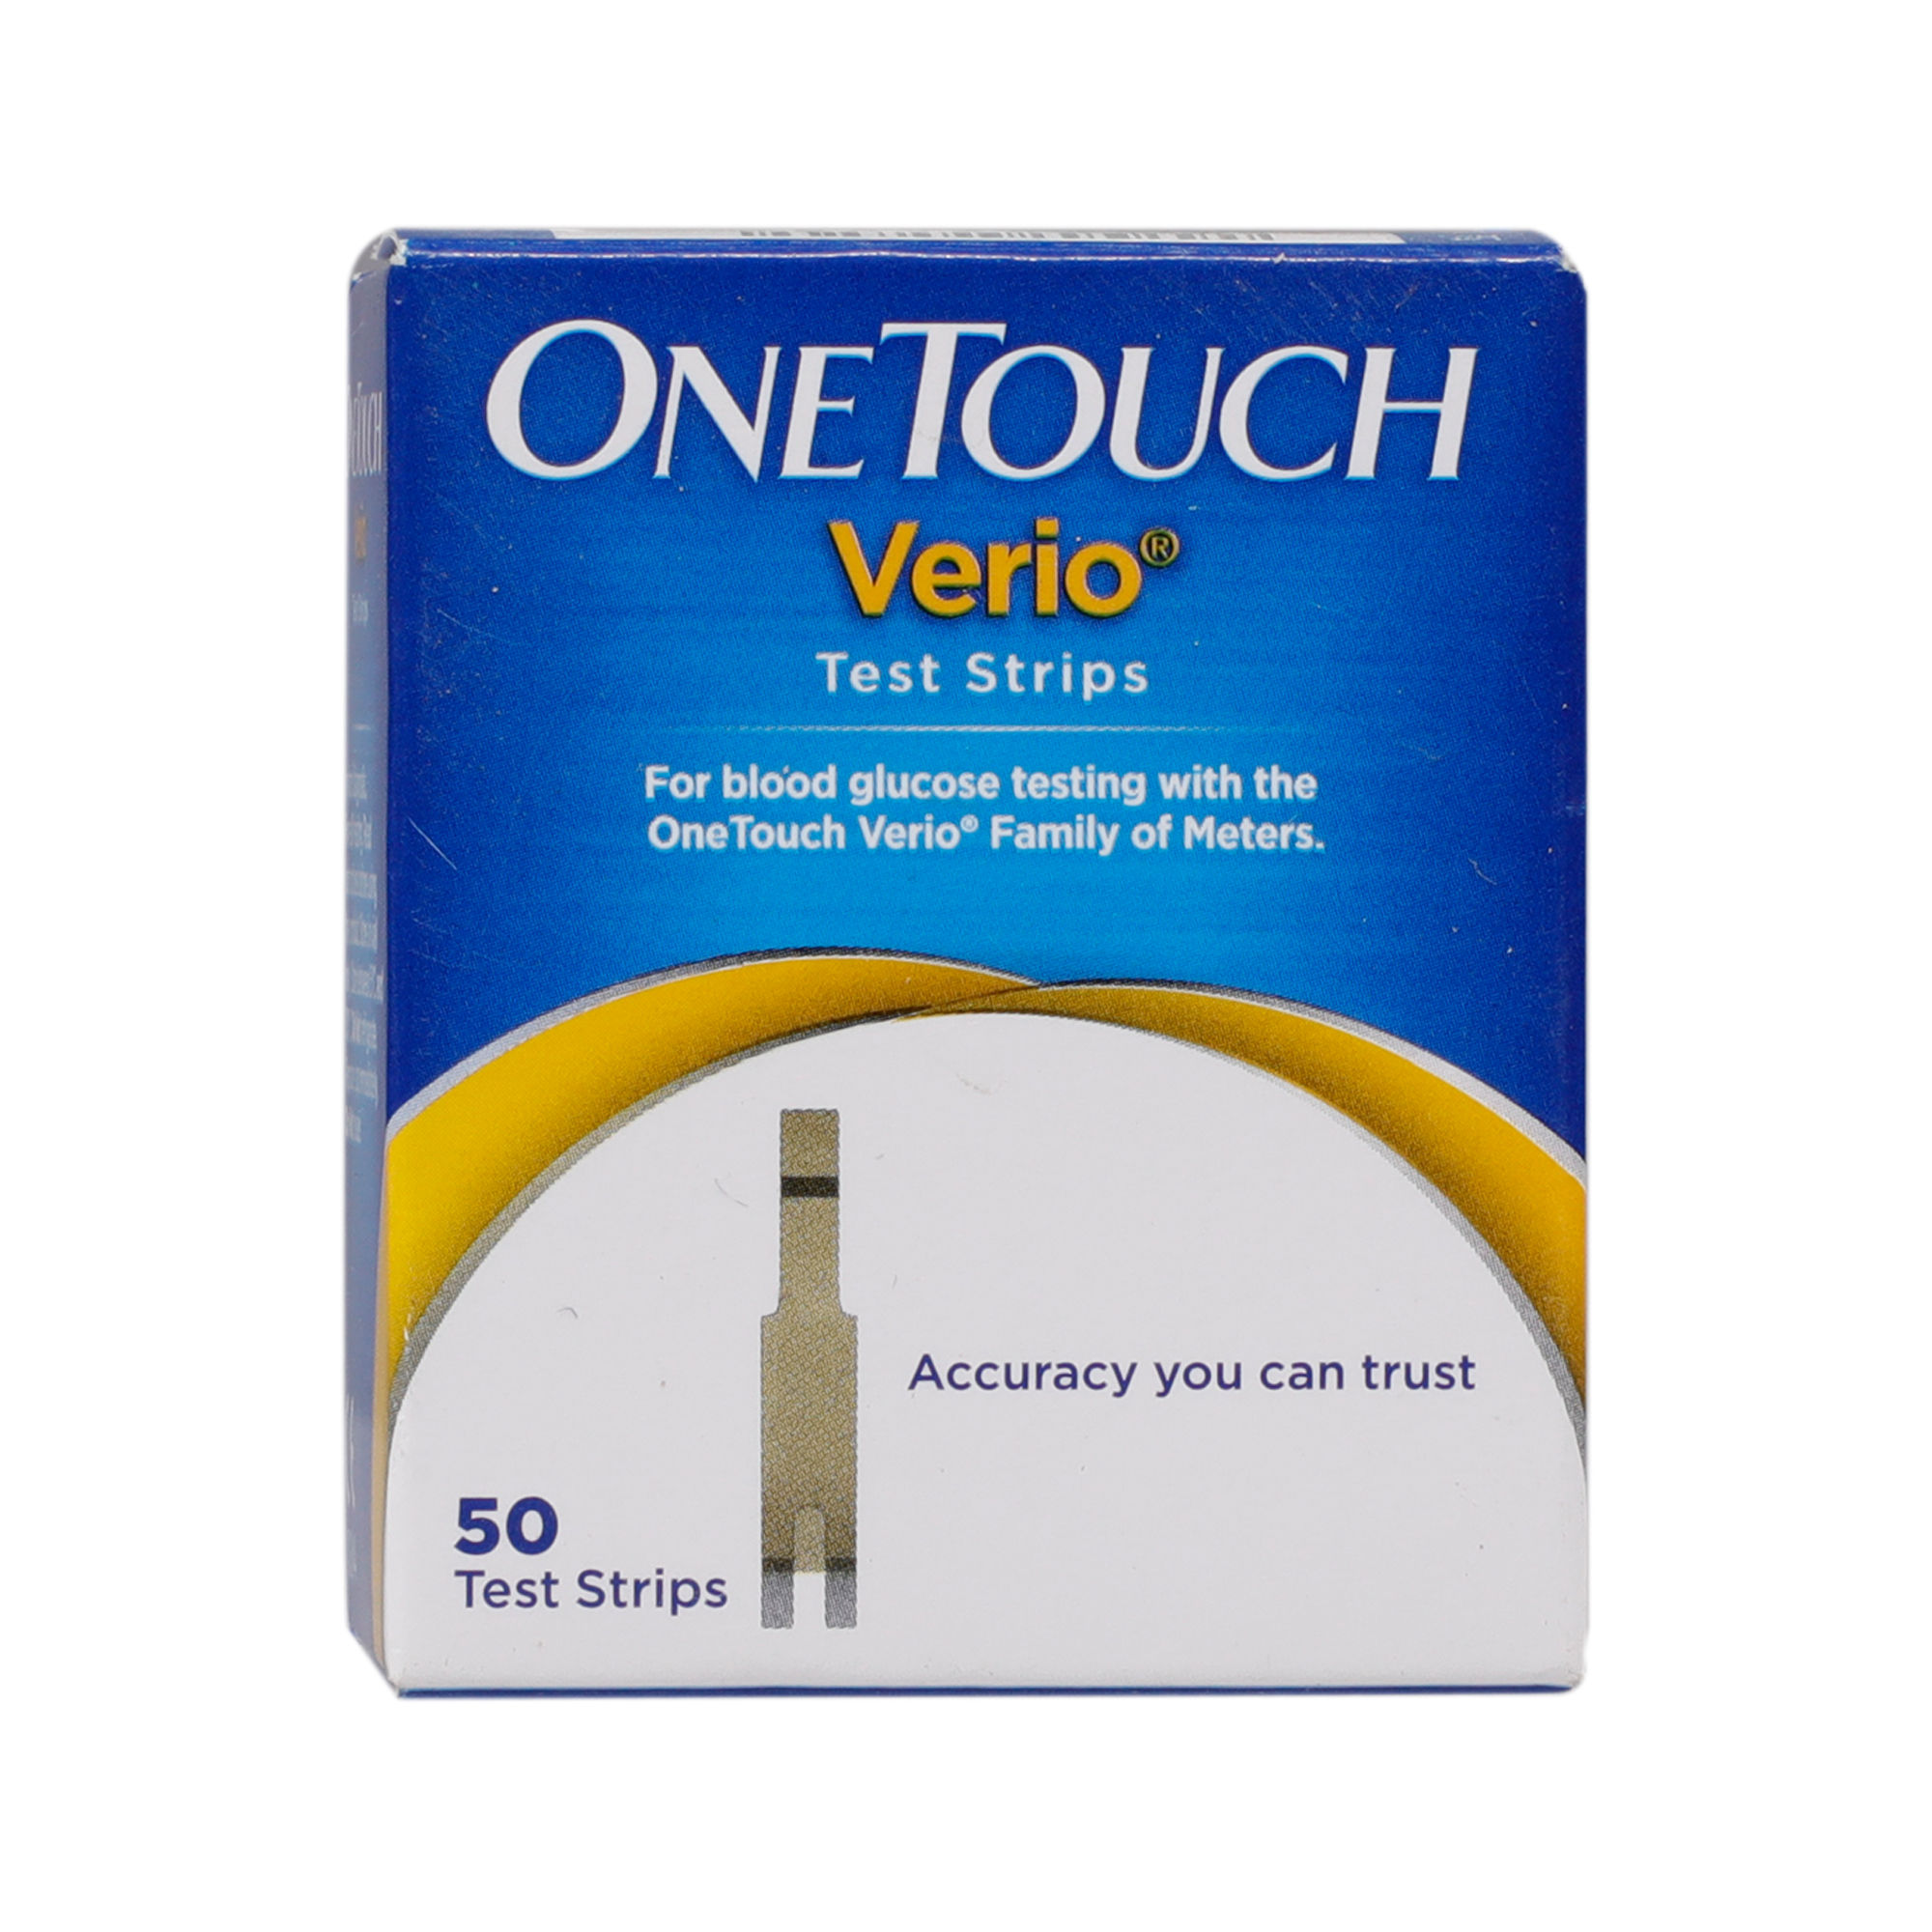 Buy OneTouch Verio Test Strips, 50 Count Online